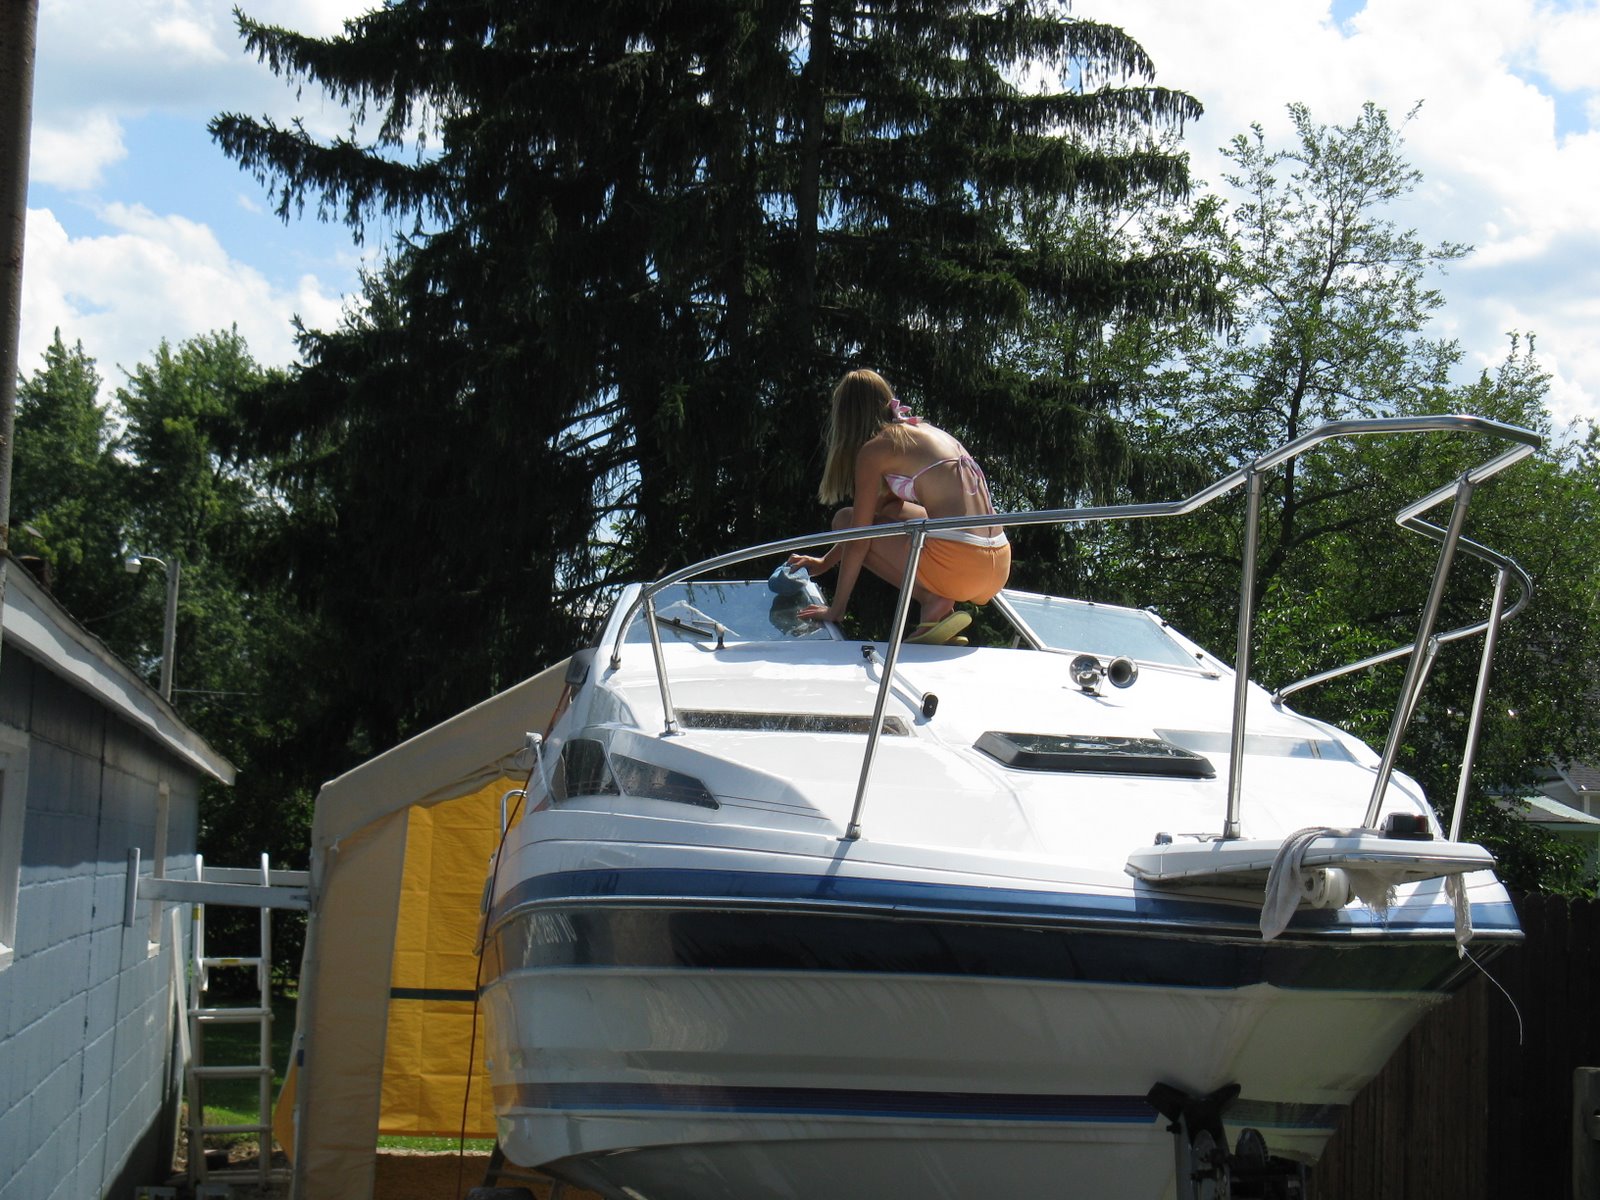 [aubs+cleaning+boat+003.JPG]